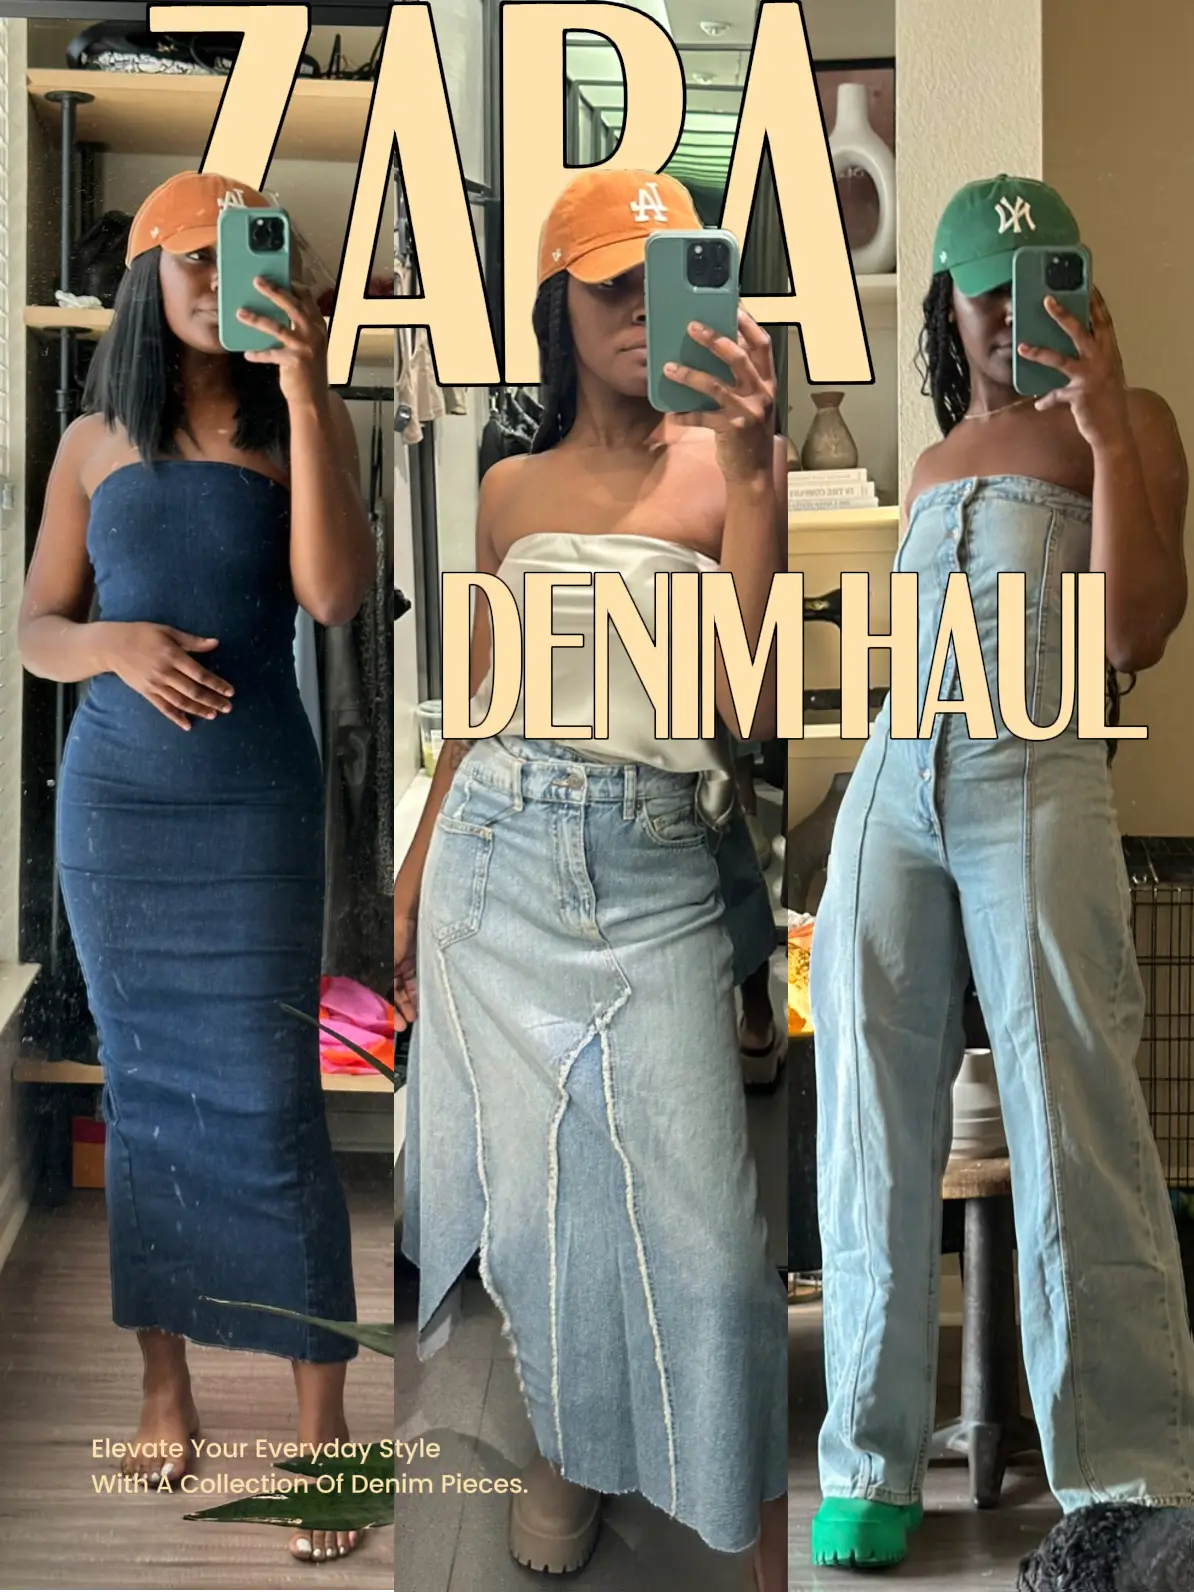 Zara Haul Pt. 2: Denim Collection, Gallery posted by Ntrleclecticism